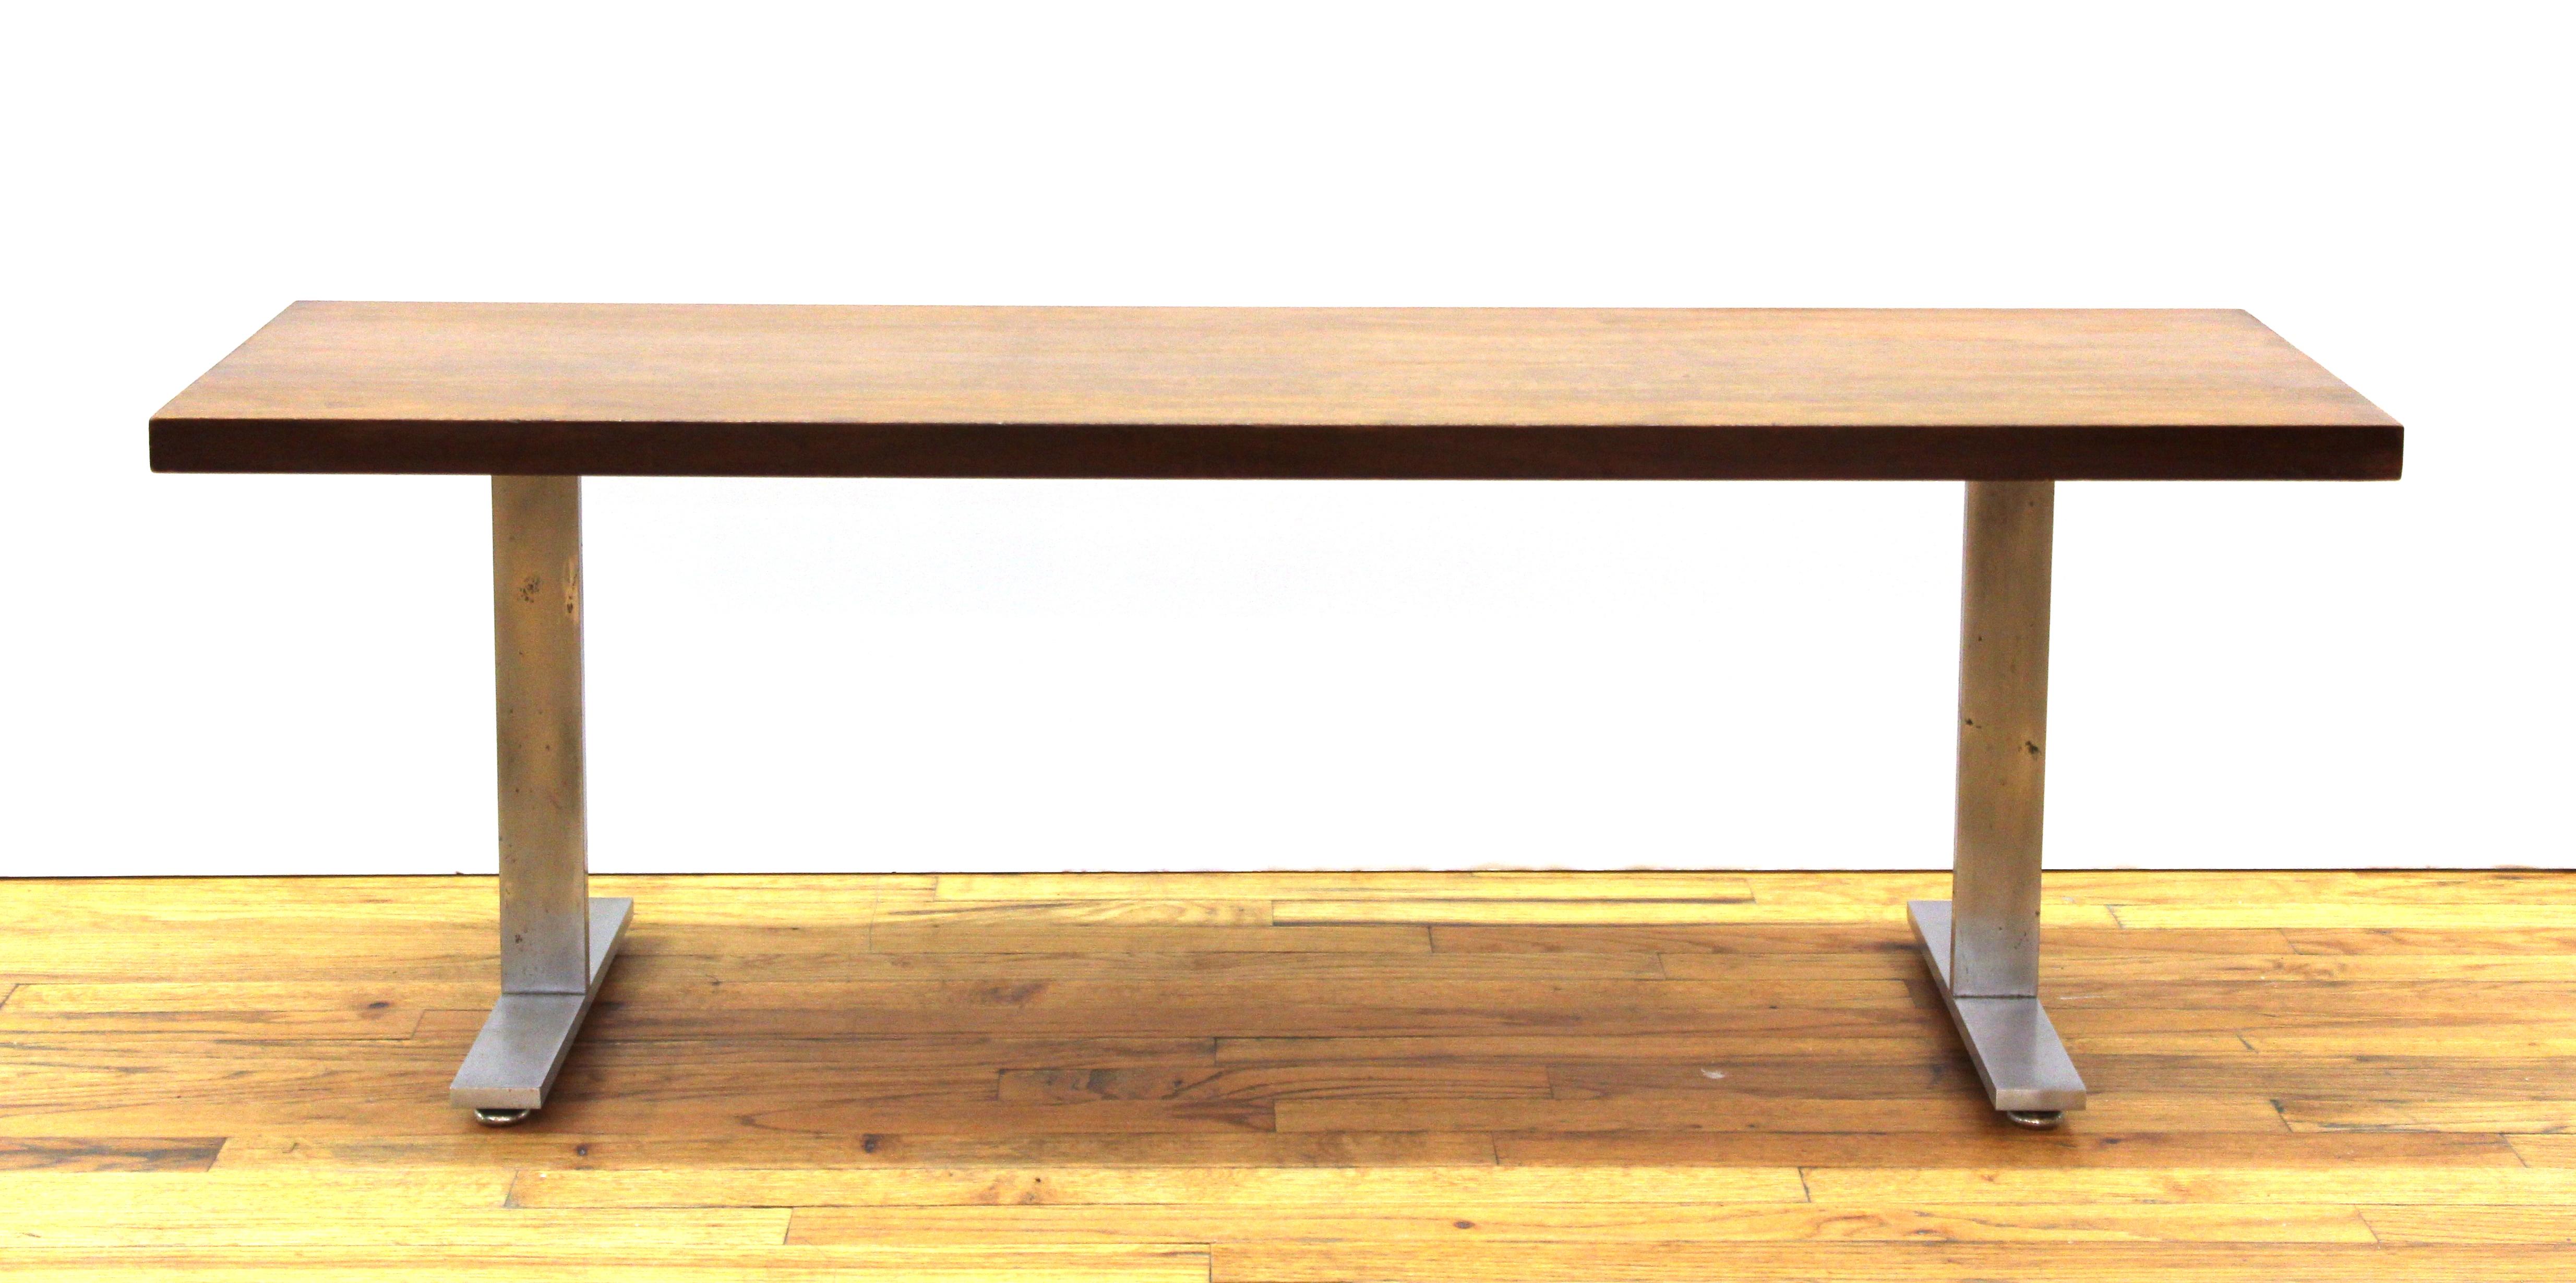 Mid-Century Modern low bench with hardwood top and metal legs. In great vintage condition with age-appropriate wear and use.